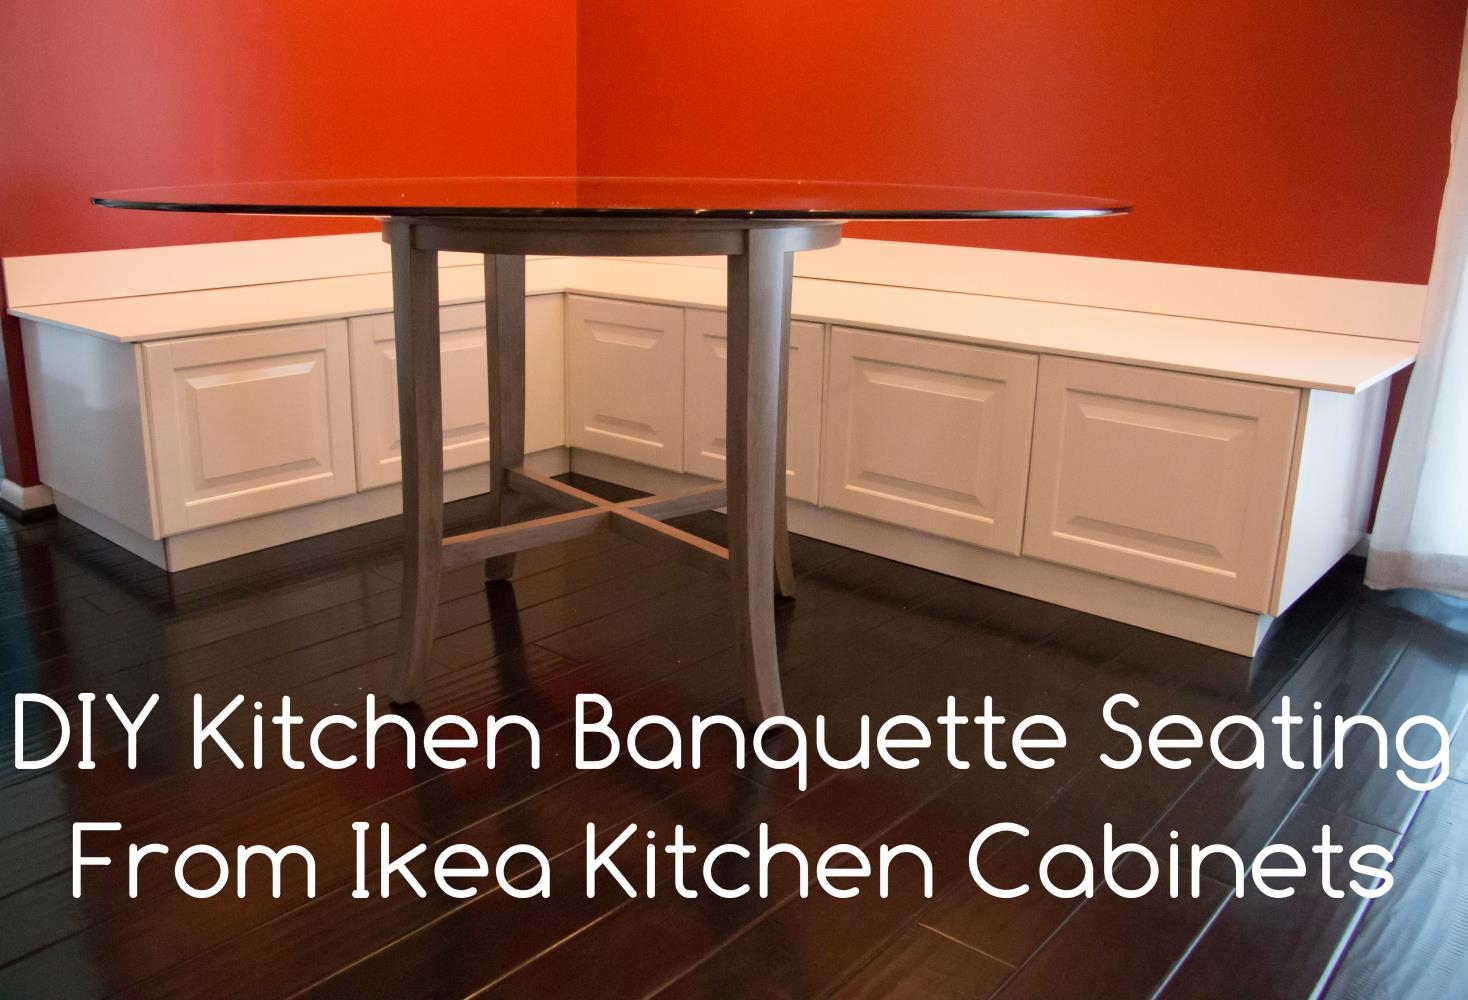 ikea-diy-kitchen-bench-or-banquette-seating